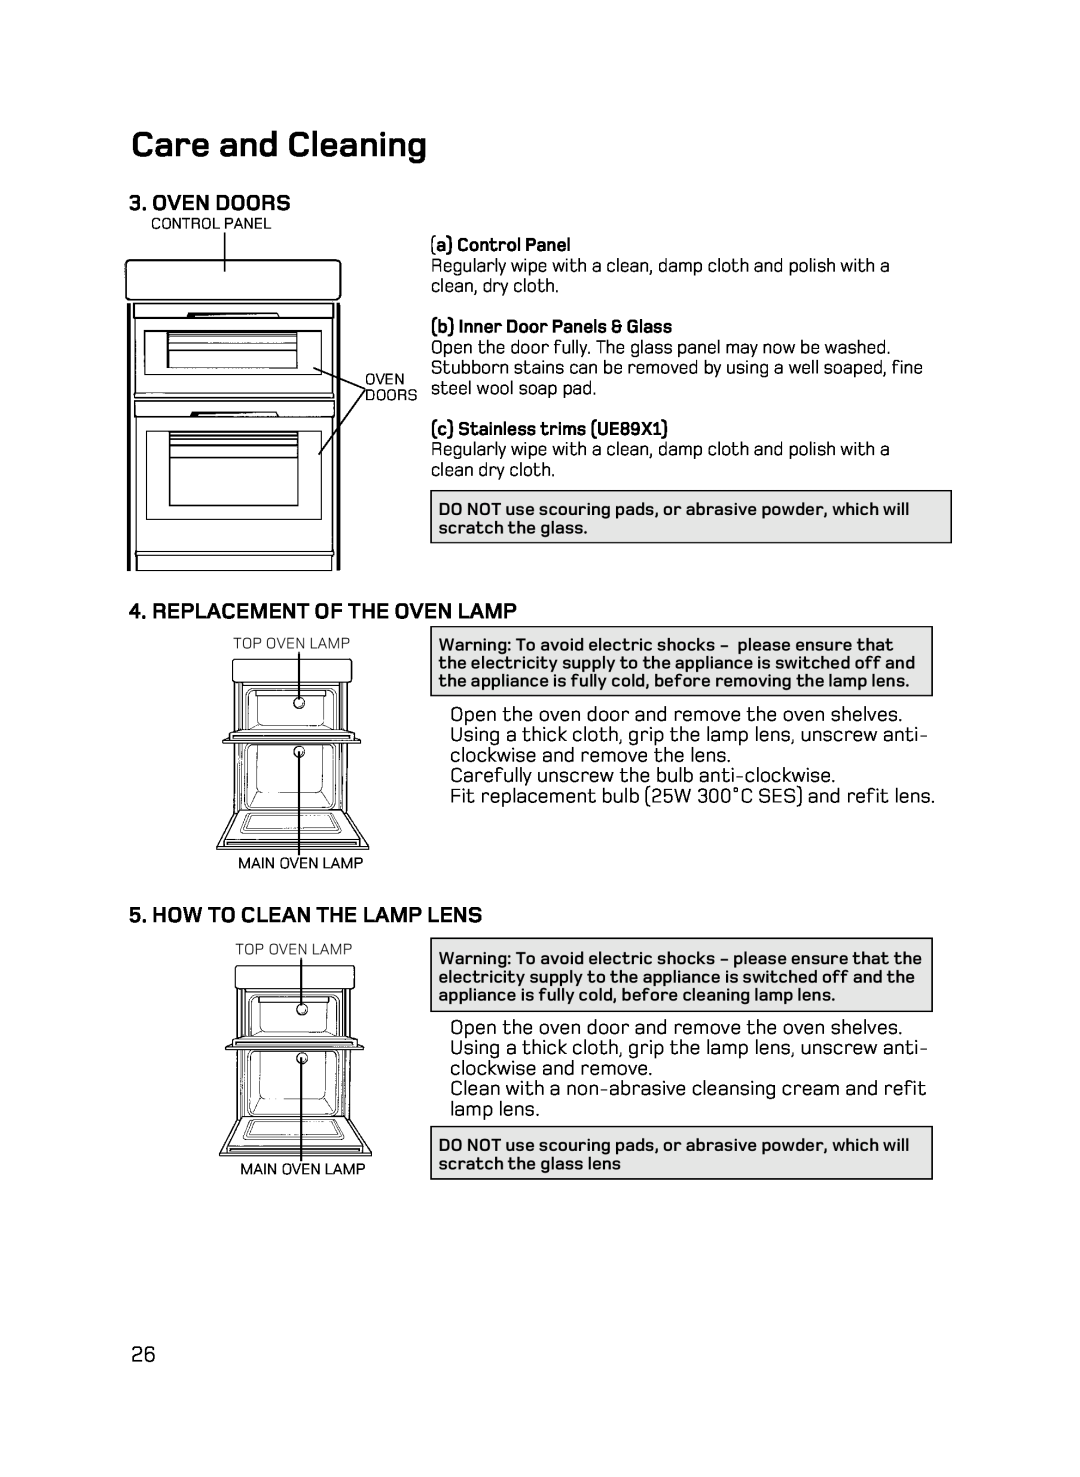 Hotpoint UE89X1 UQ89I manual Care and Cleaning, Oven Doors, Replacement Of The Oven Lamp, How To Clean The Lamp Lens 